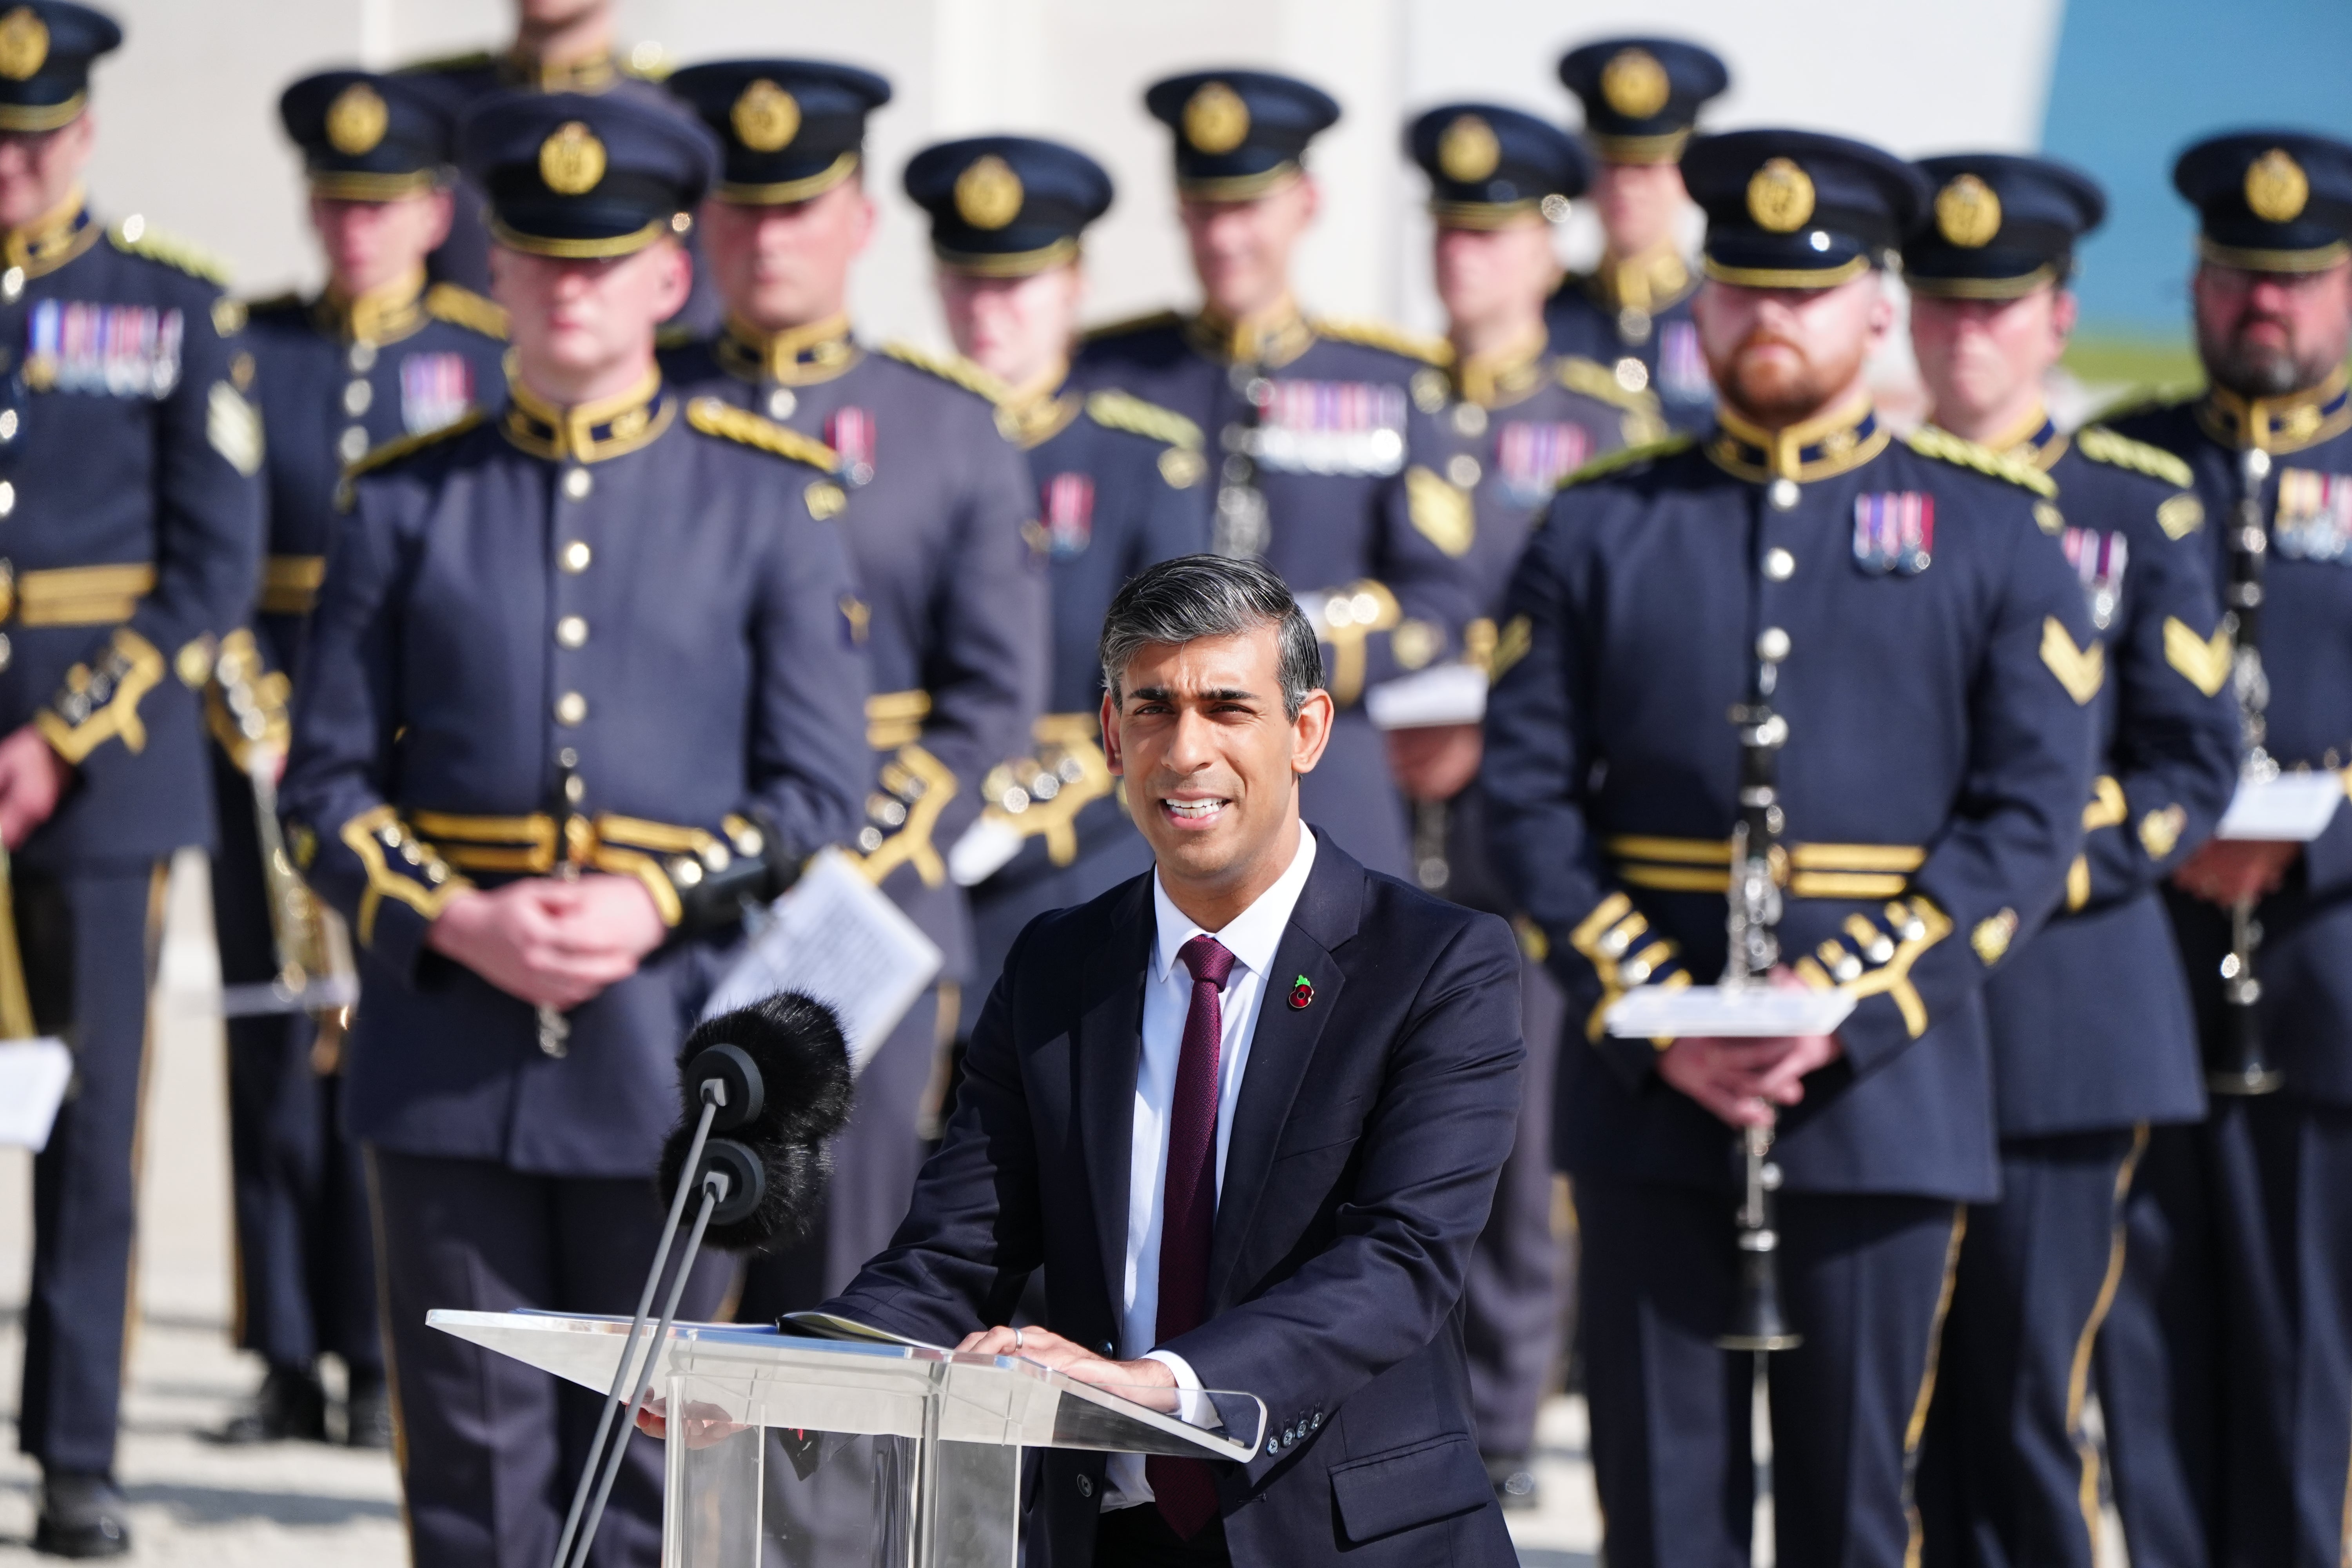 Prime Minister Rishi Sunak speaking during the UK national commemorative event for the 80th anniversary of D-Day